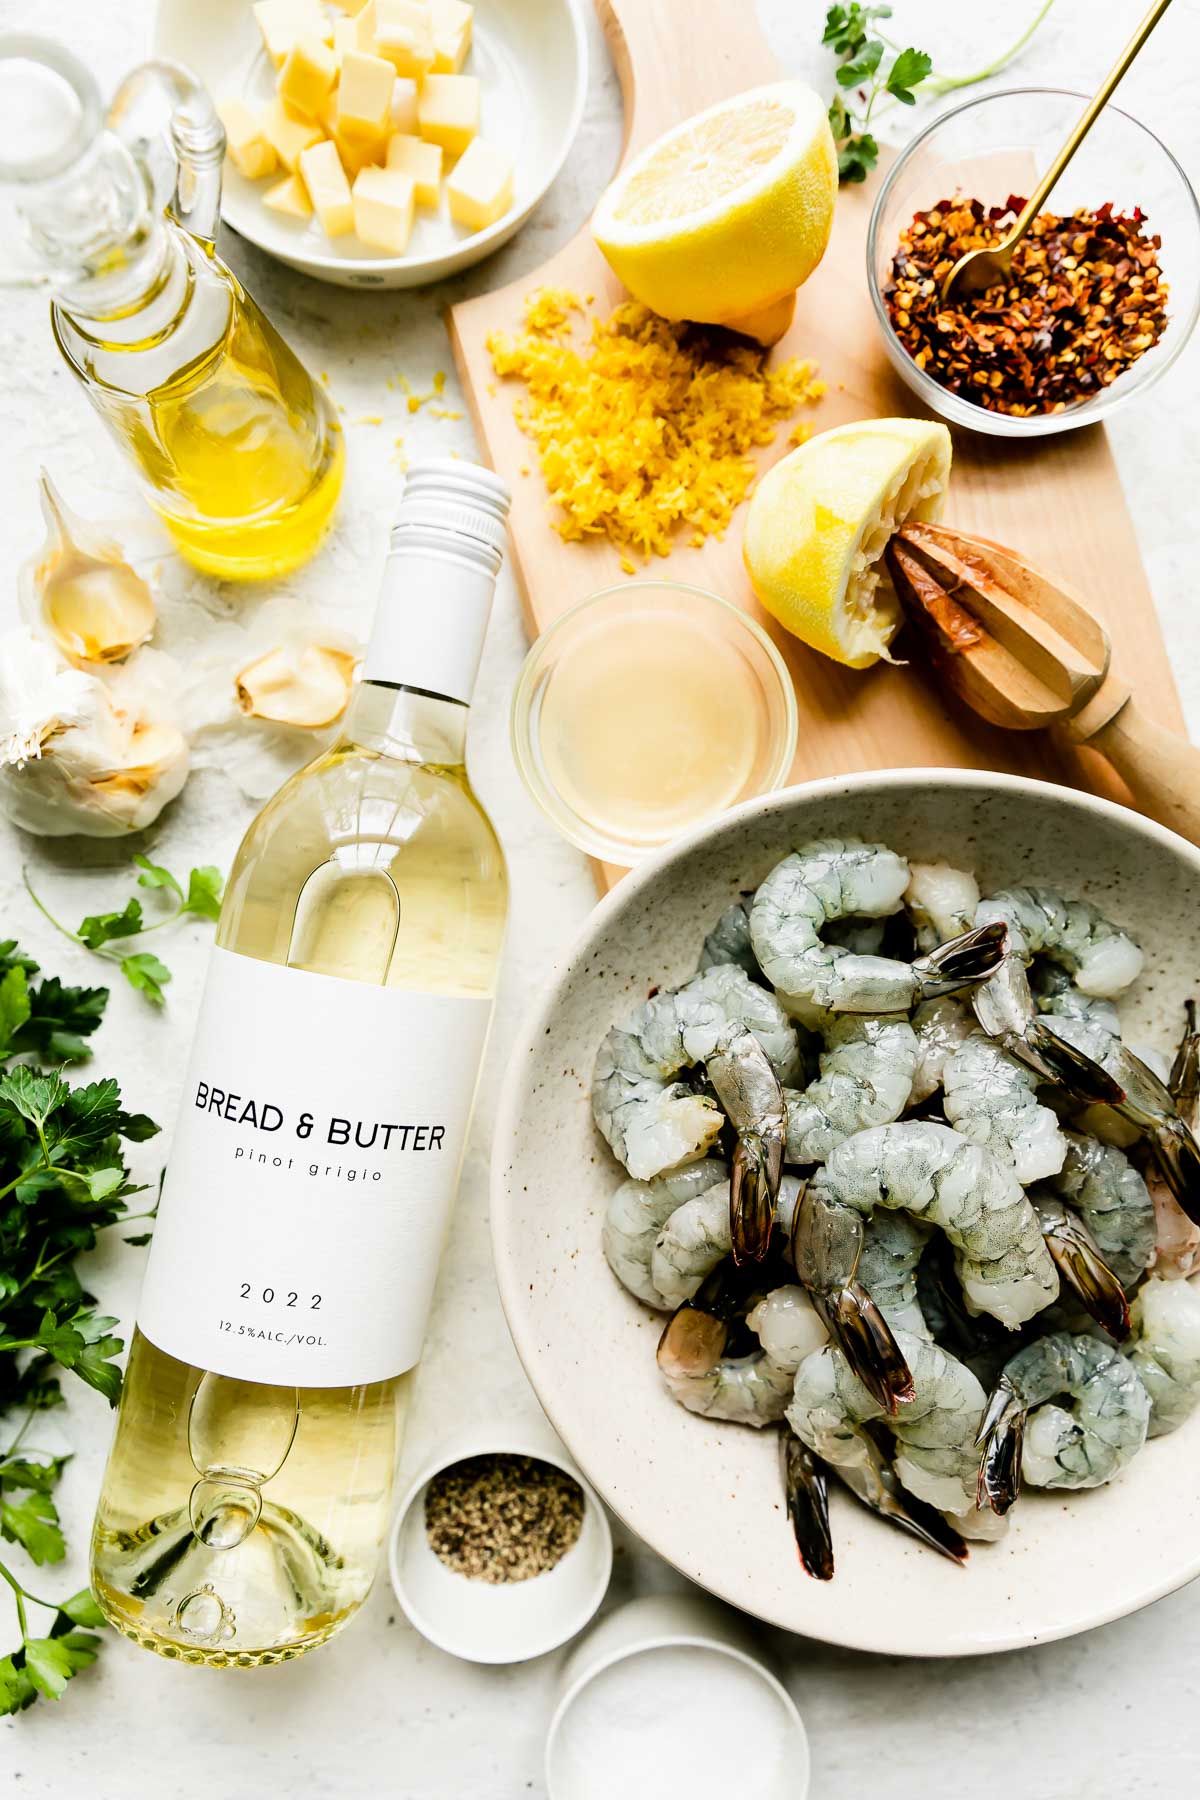 Baked shrimp scampi ingredients arranged on a creamy white textured surface: "extra jumbo" shrimp, olive oil, Bread & Butter California Pinot Grigio or another unoaked dry white wine, garlic, crushed red pepper flakes, unsalted butter, lemon, fresh parsley, kosher salt, and ground black pepper.